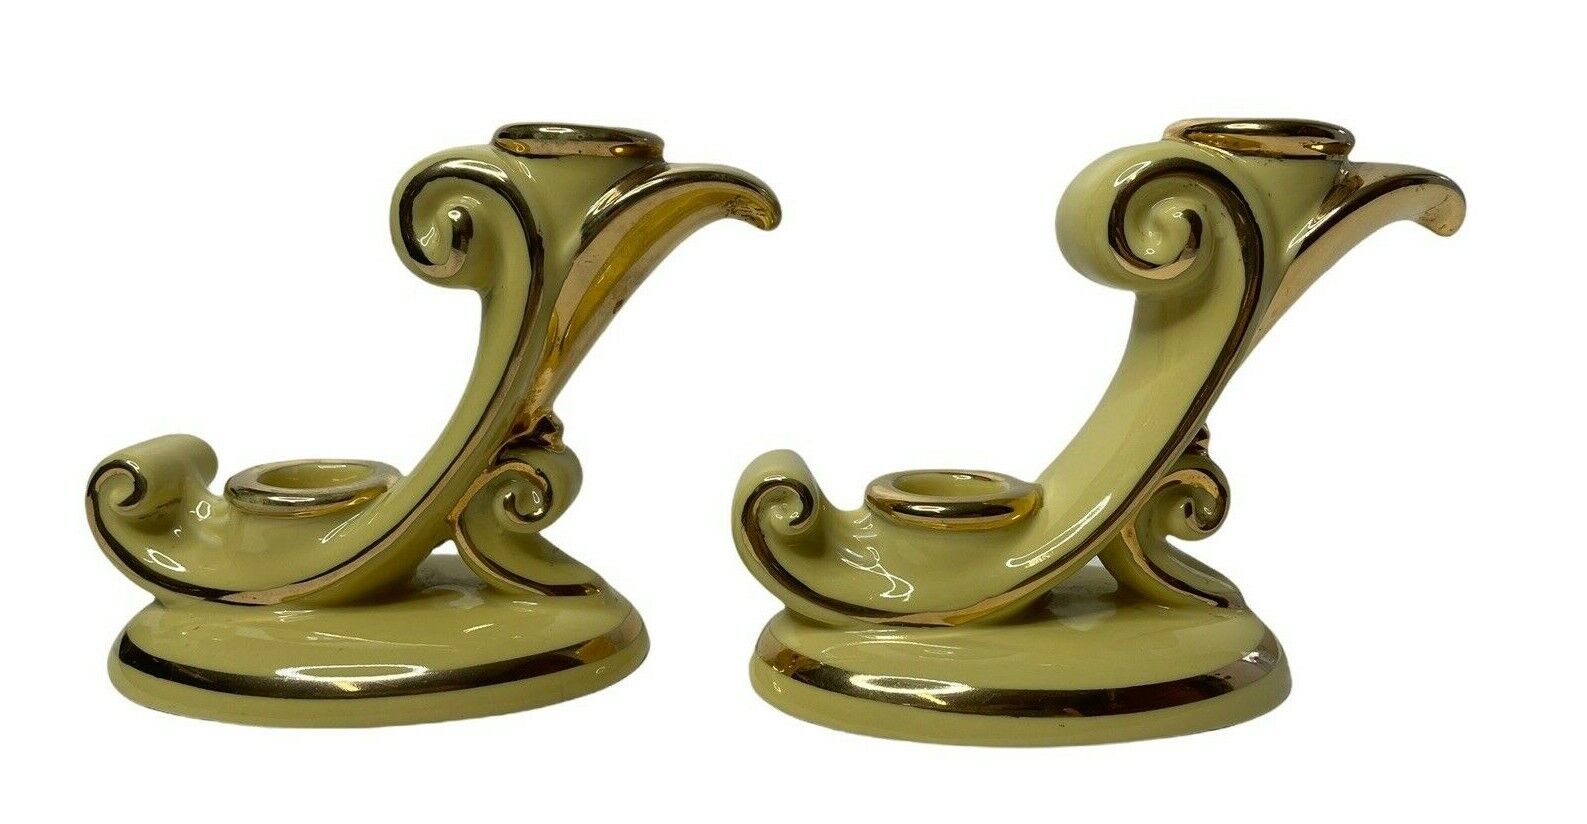 Pair Abingdon Pottery Candle Holders Yellow and Gold Double Taper Candlesticks 